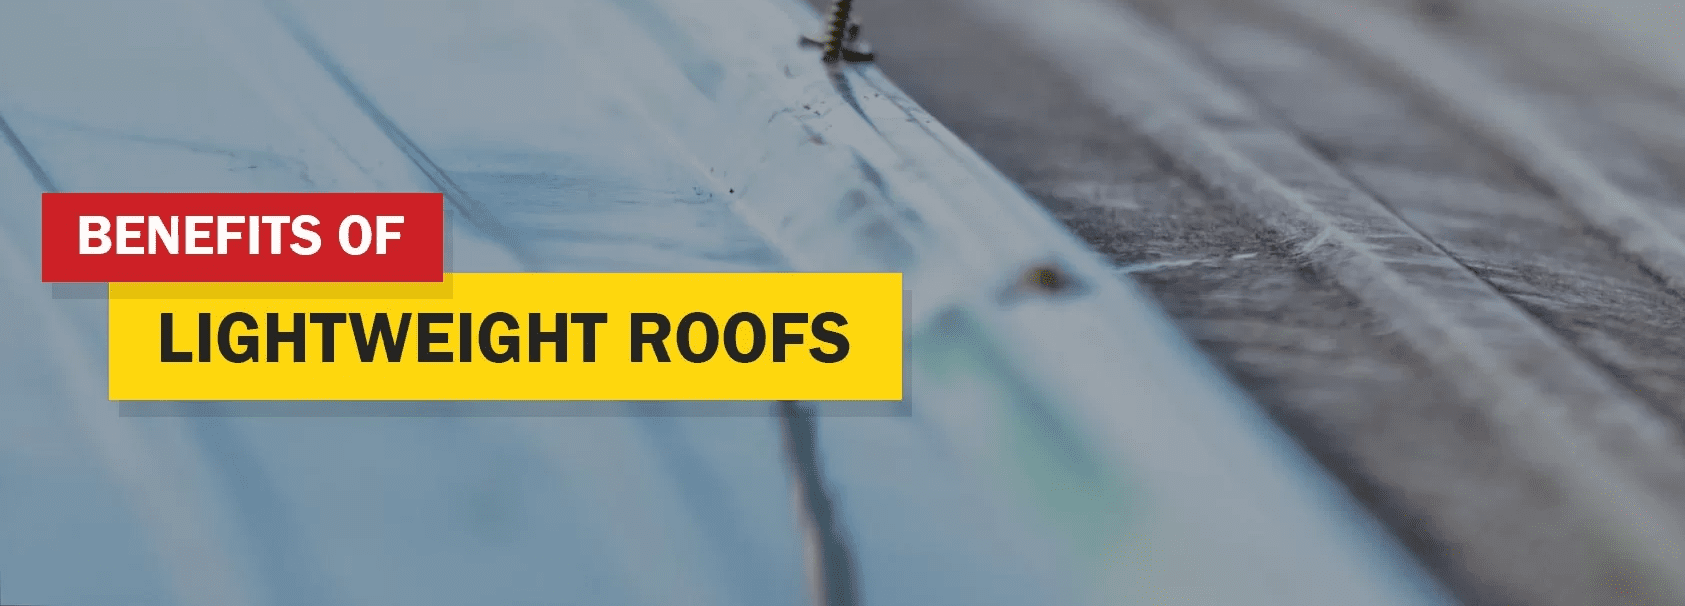 Roofing Companies Lightweight Roofing: Benefits and Advantages Explained | Storm Damage Experts and Alliance Specialty Contractor